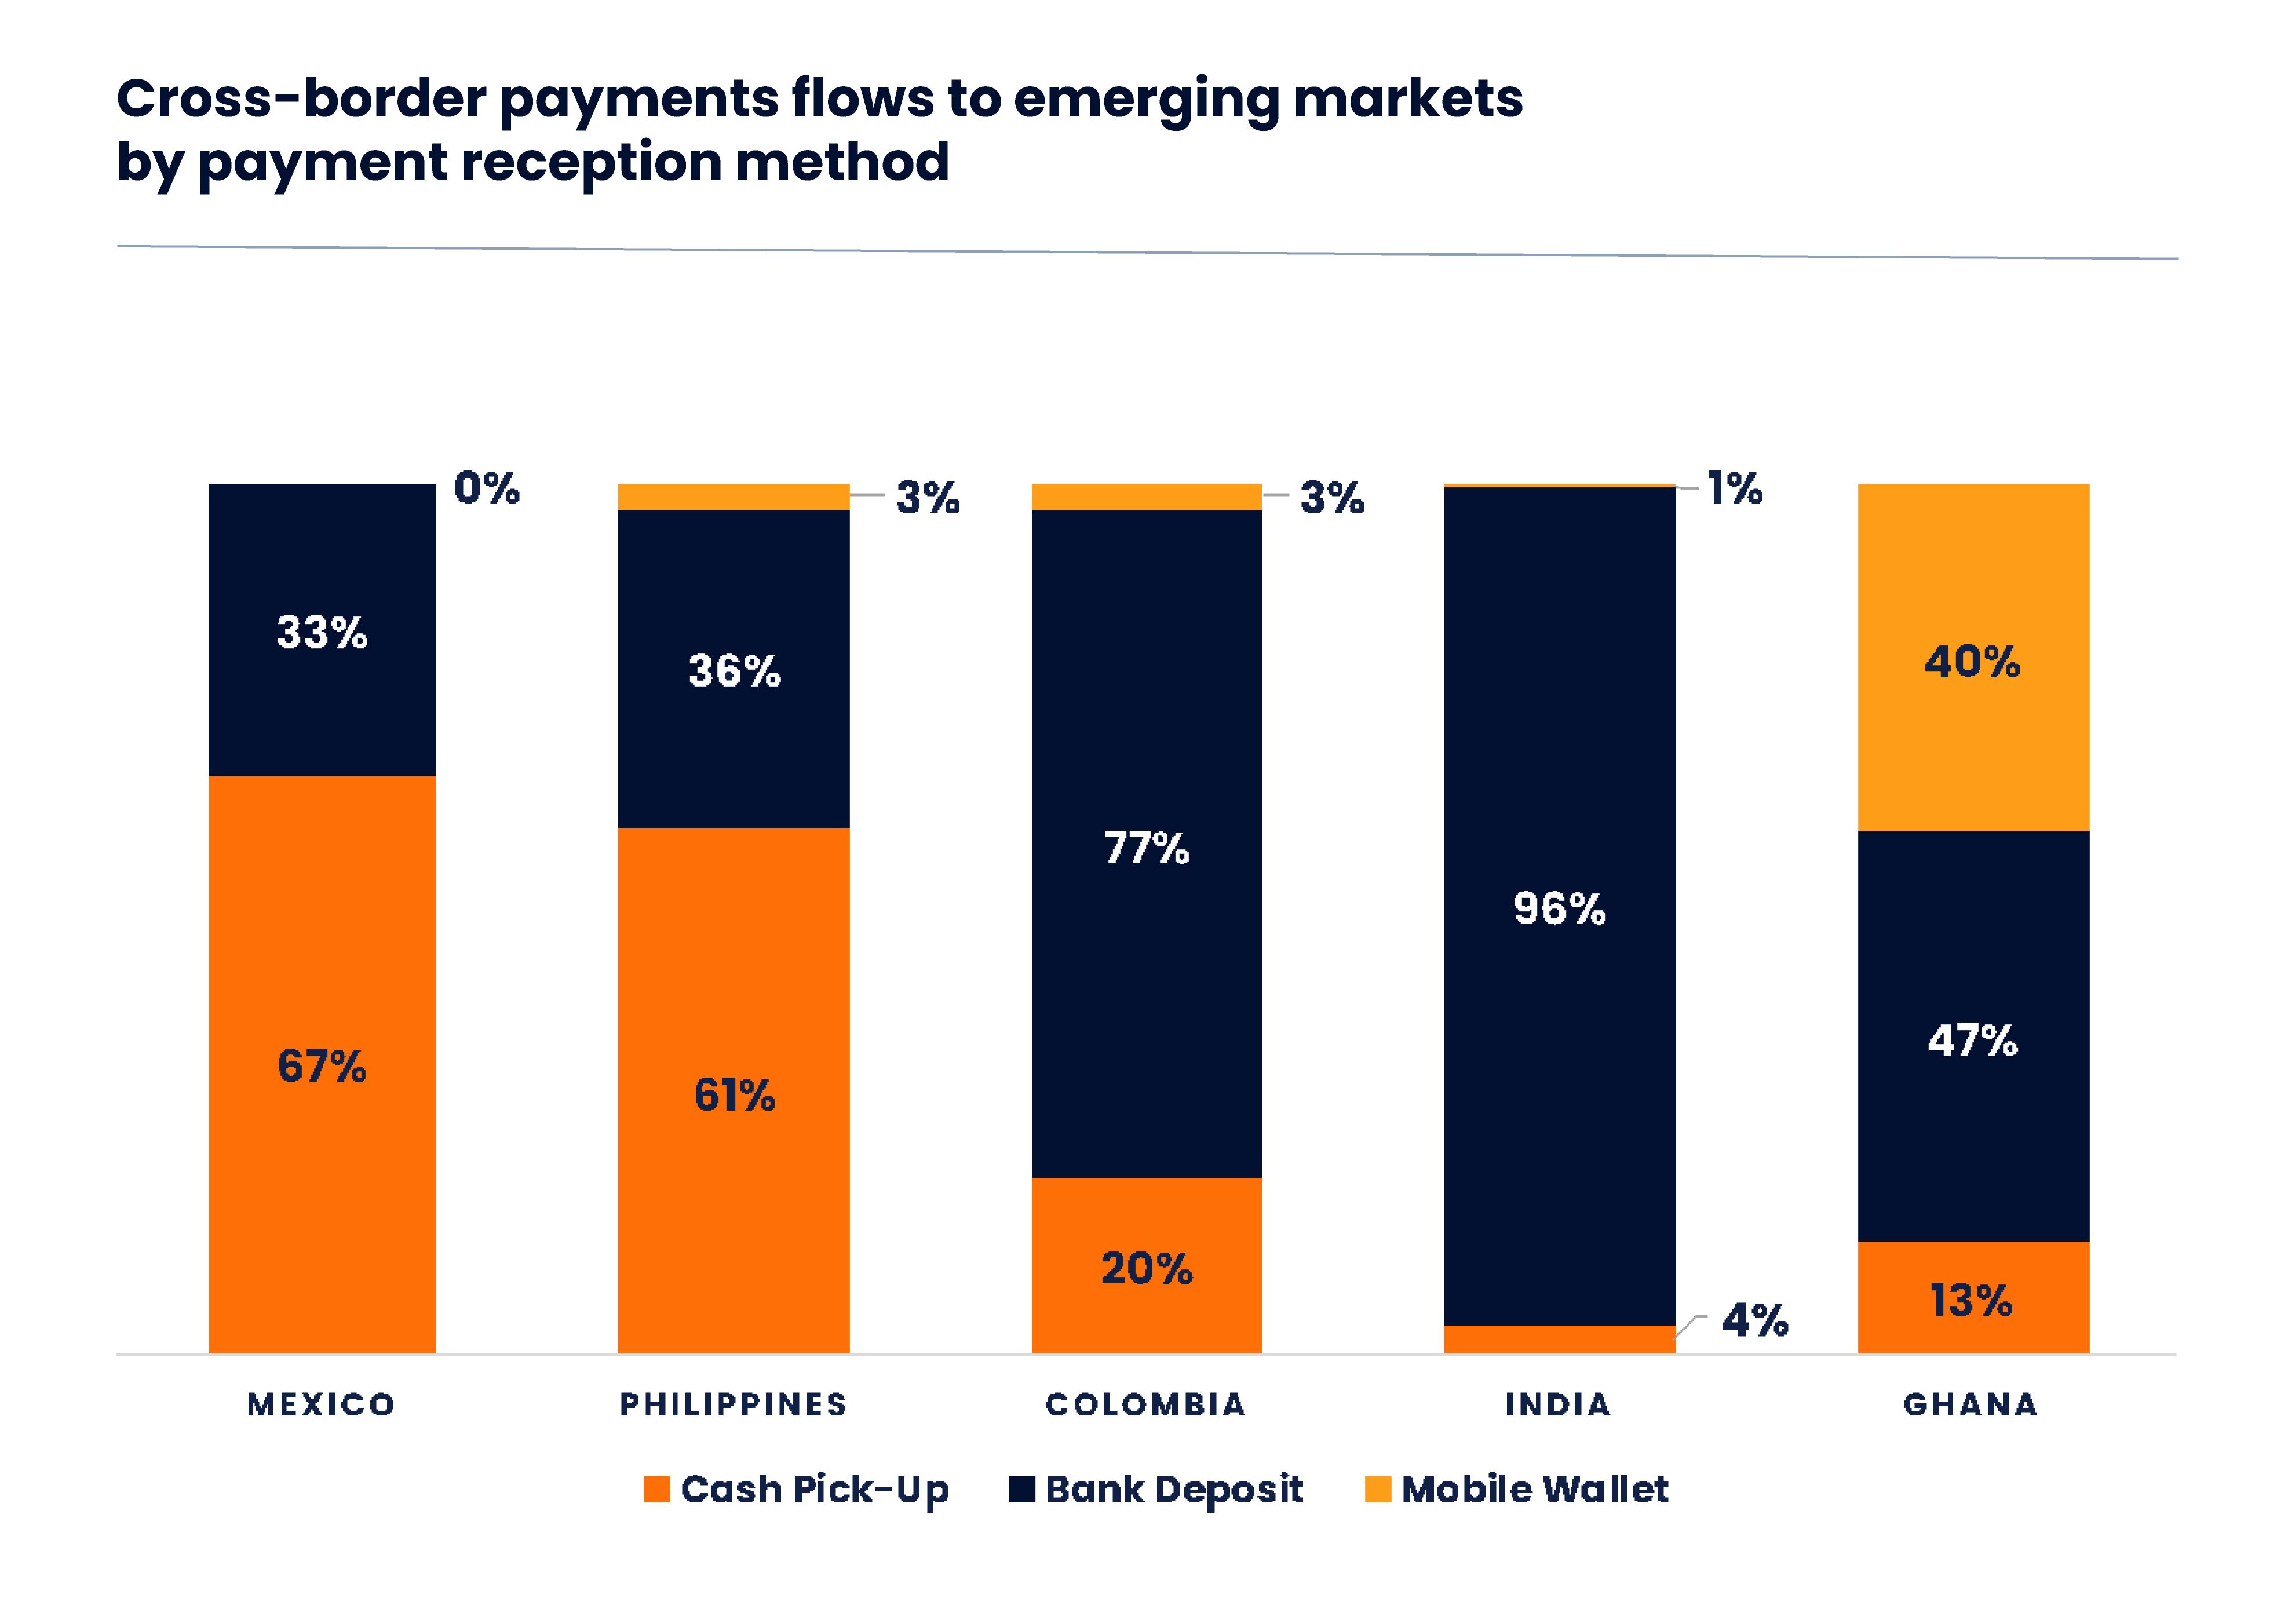 Cross-border payment flows to emerging markets